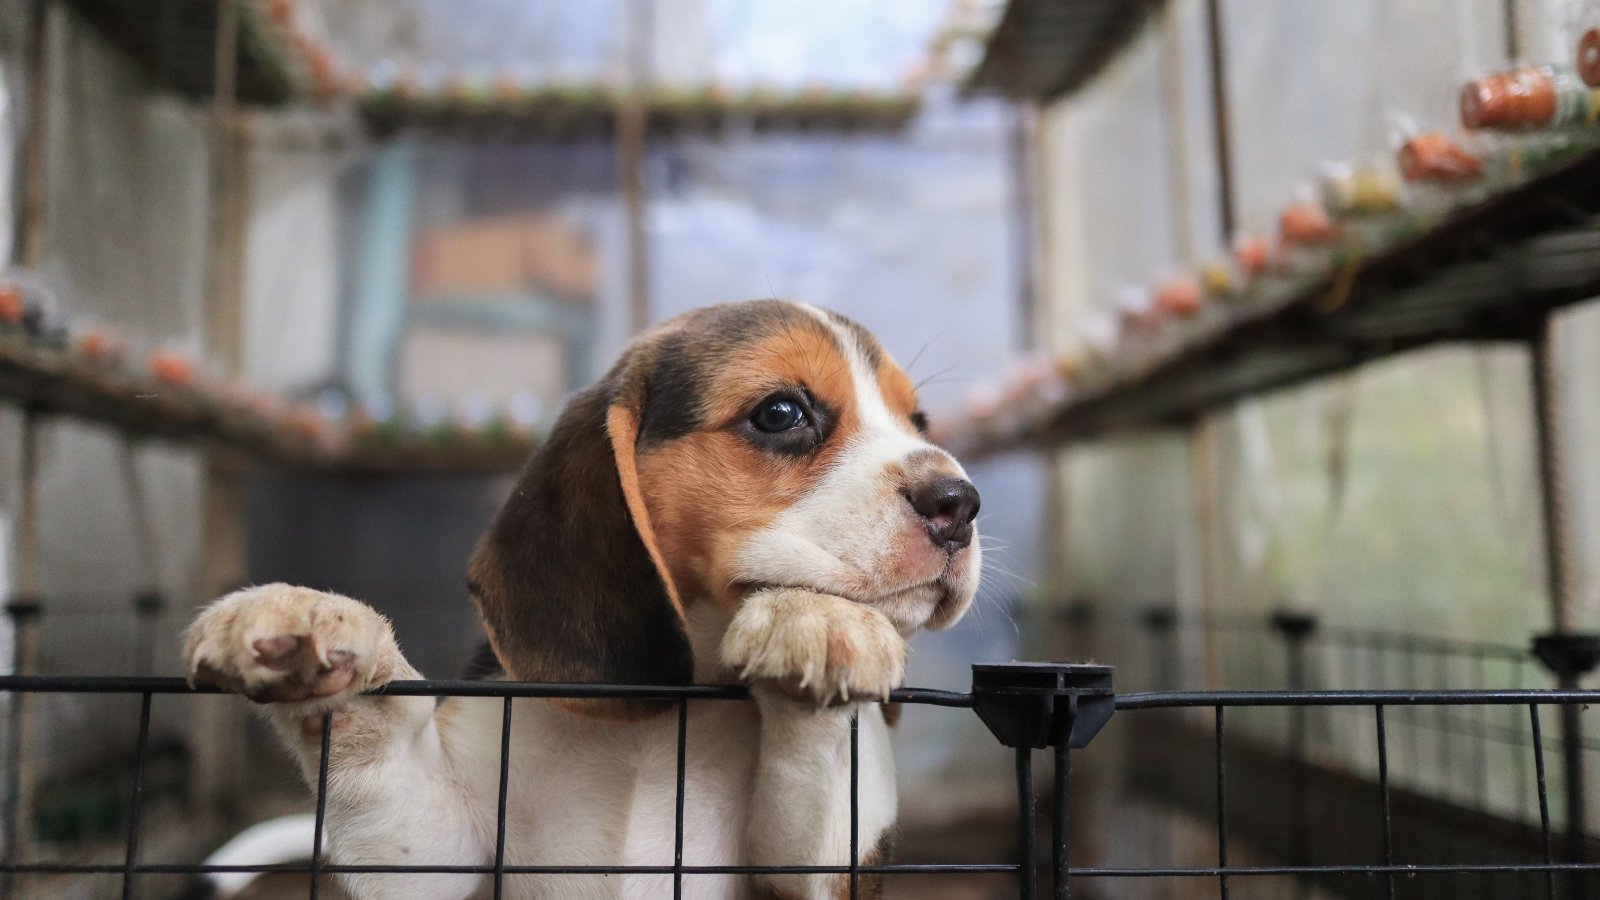 A beagle puppy trying to climb out of a cage